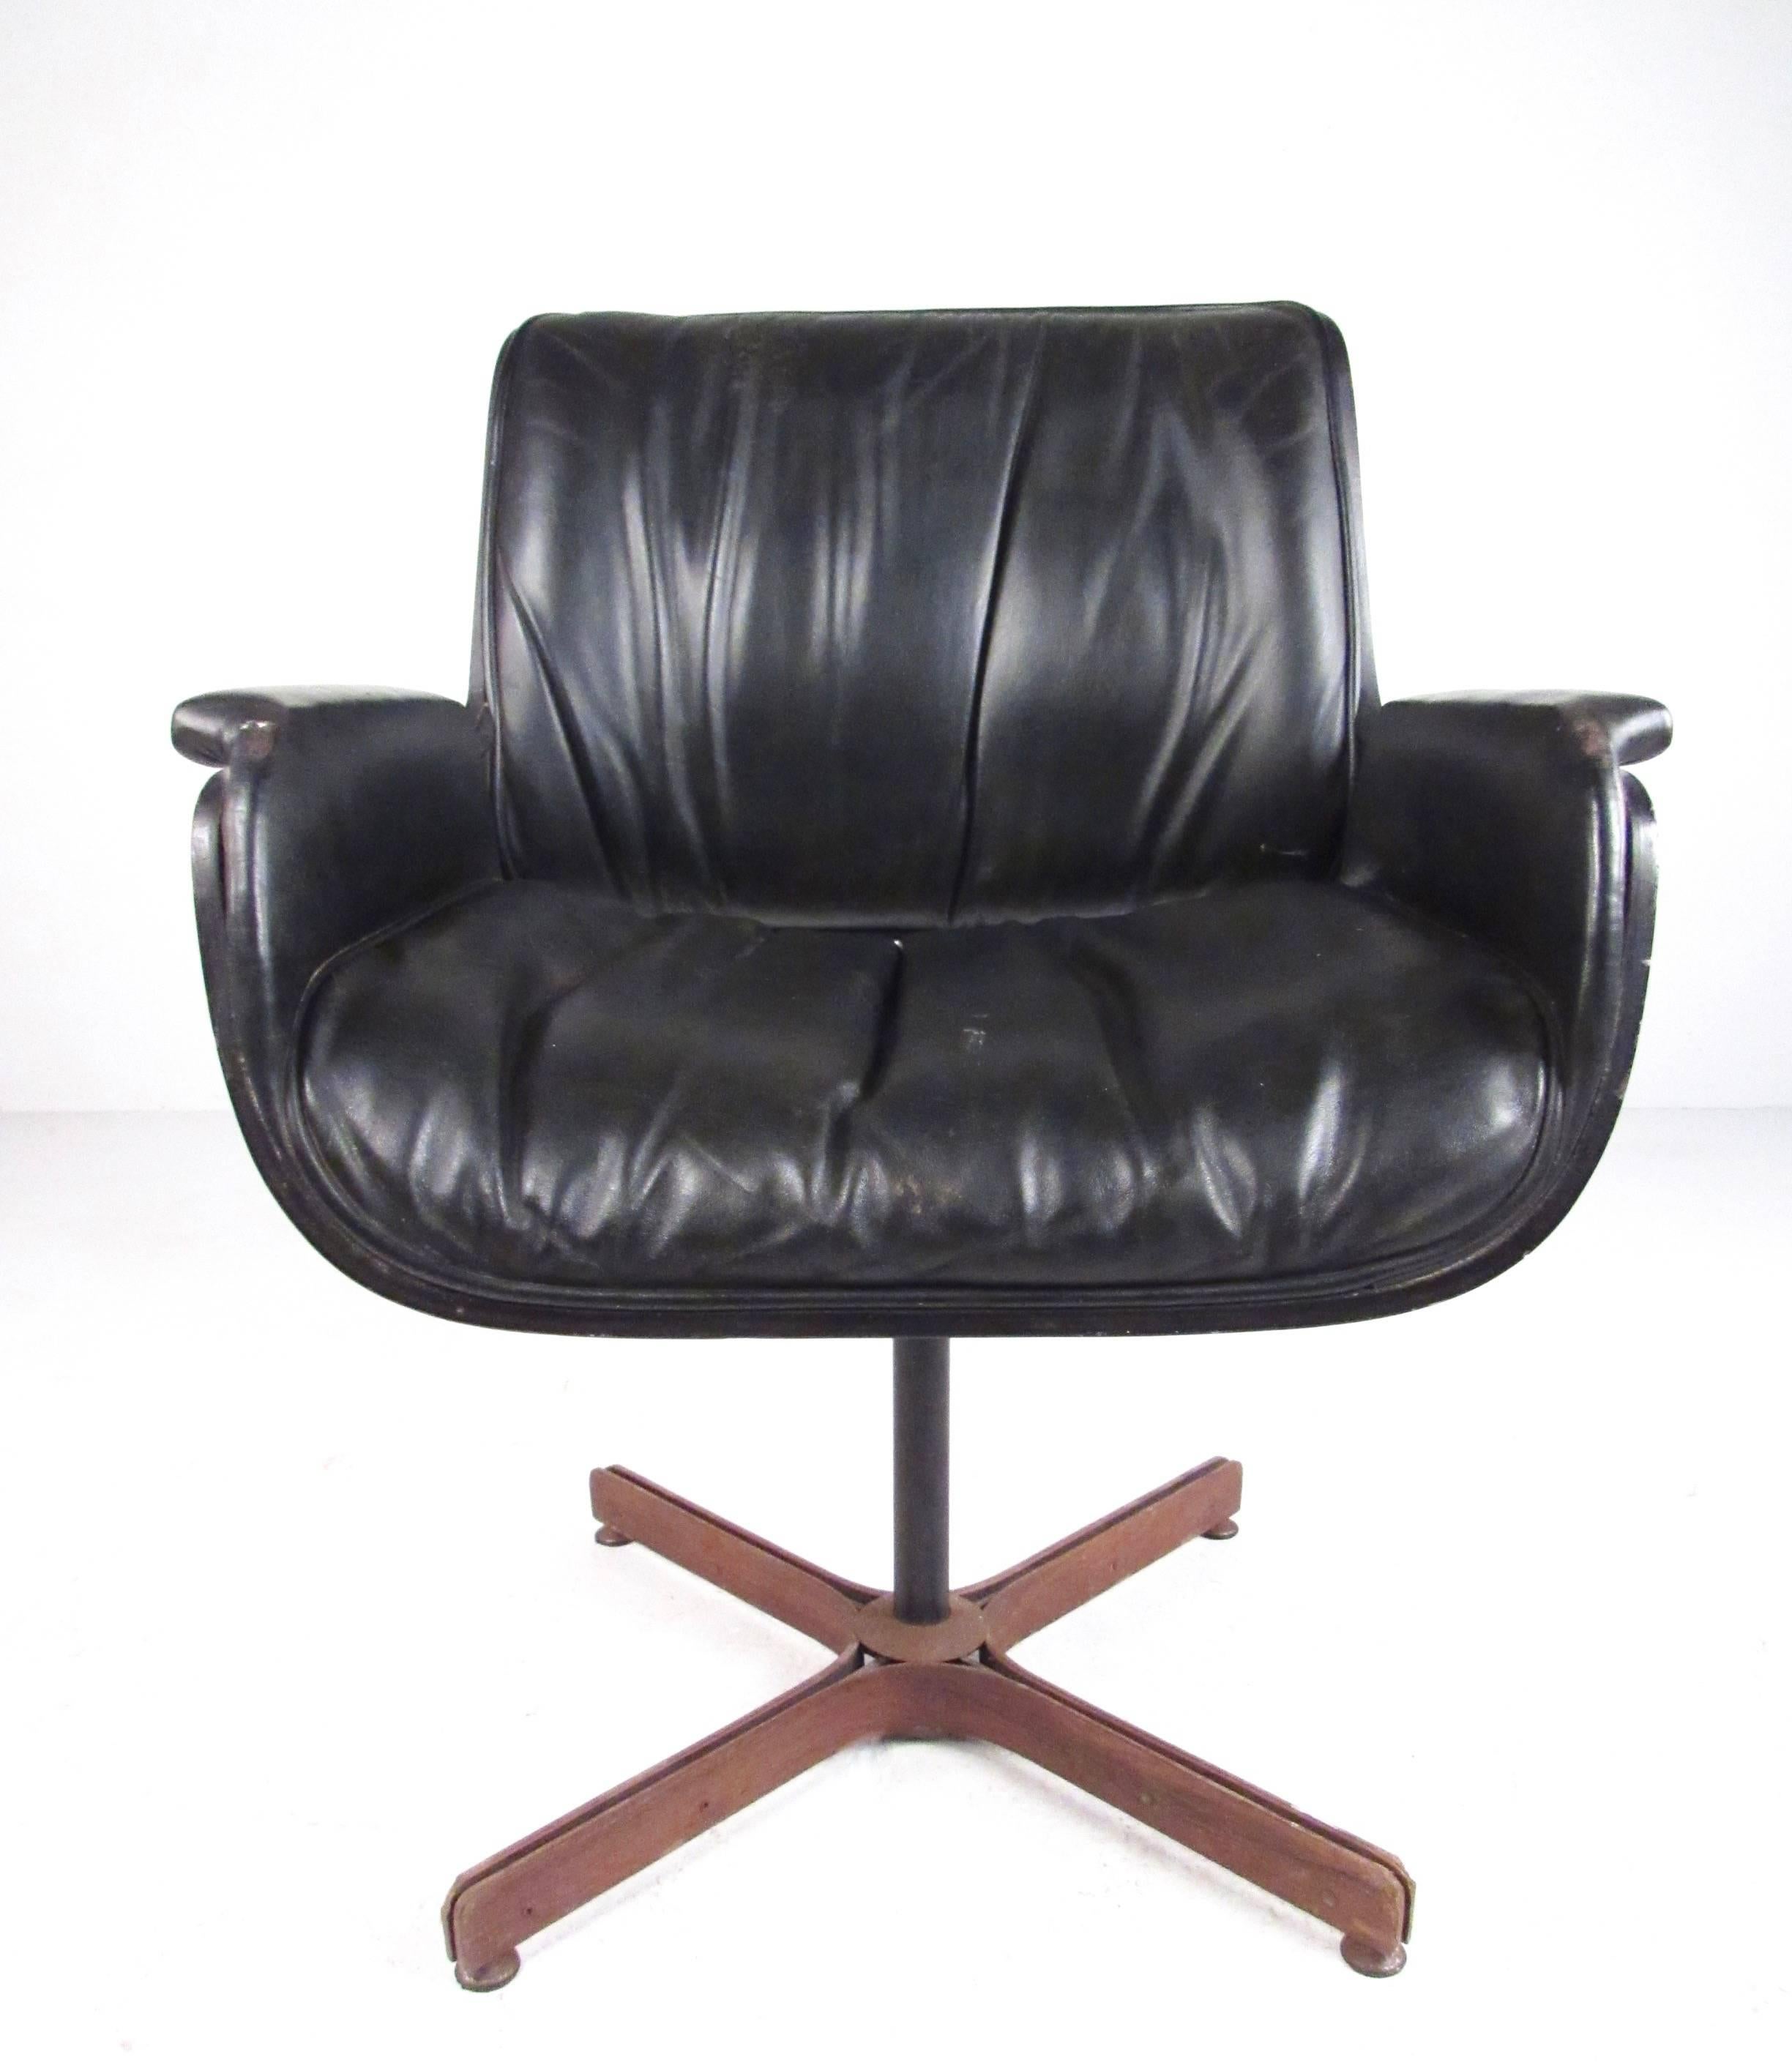 This unique Plycraft style leather armchair features bentwood shell design, plush vintage leather upholstery, and metal swivel base. Stylish modern design makes a Classic midcentury addition to any home or office interior. Please confirm item